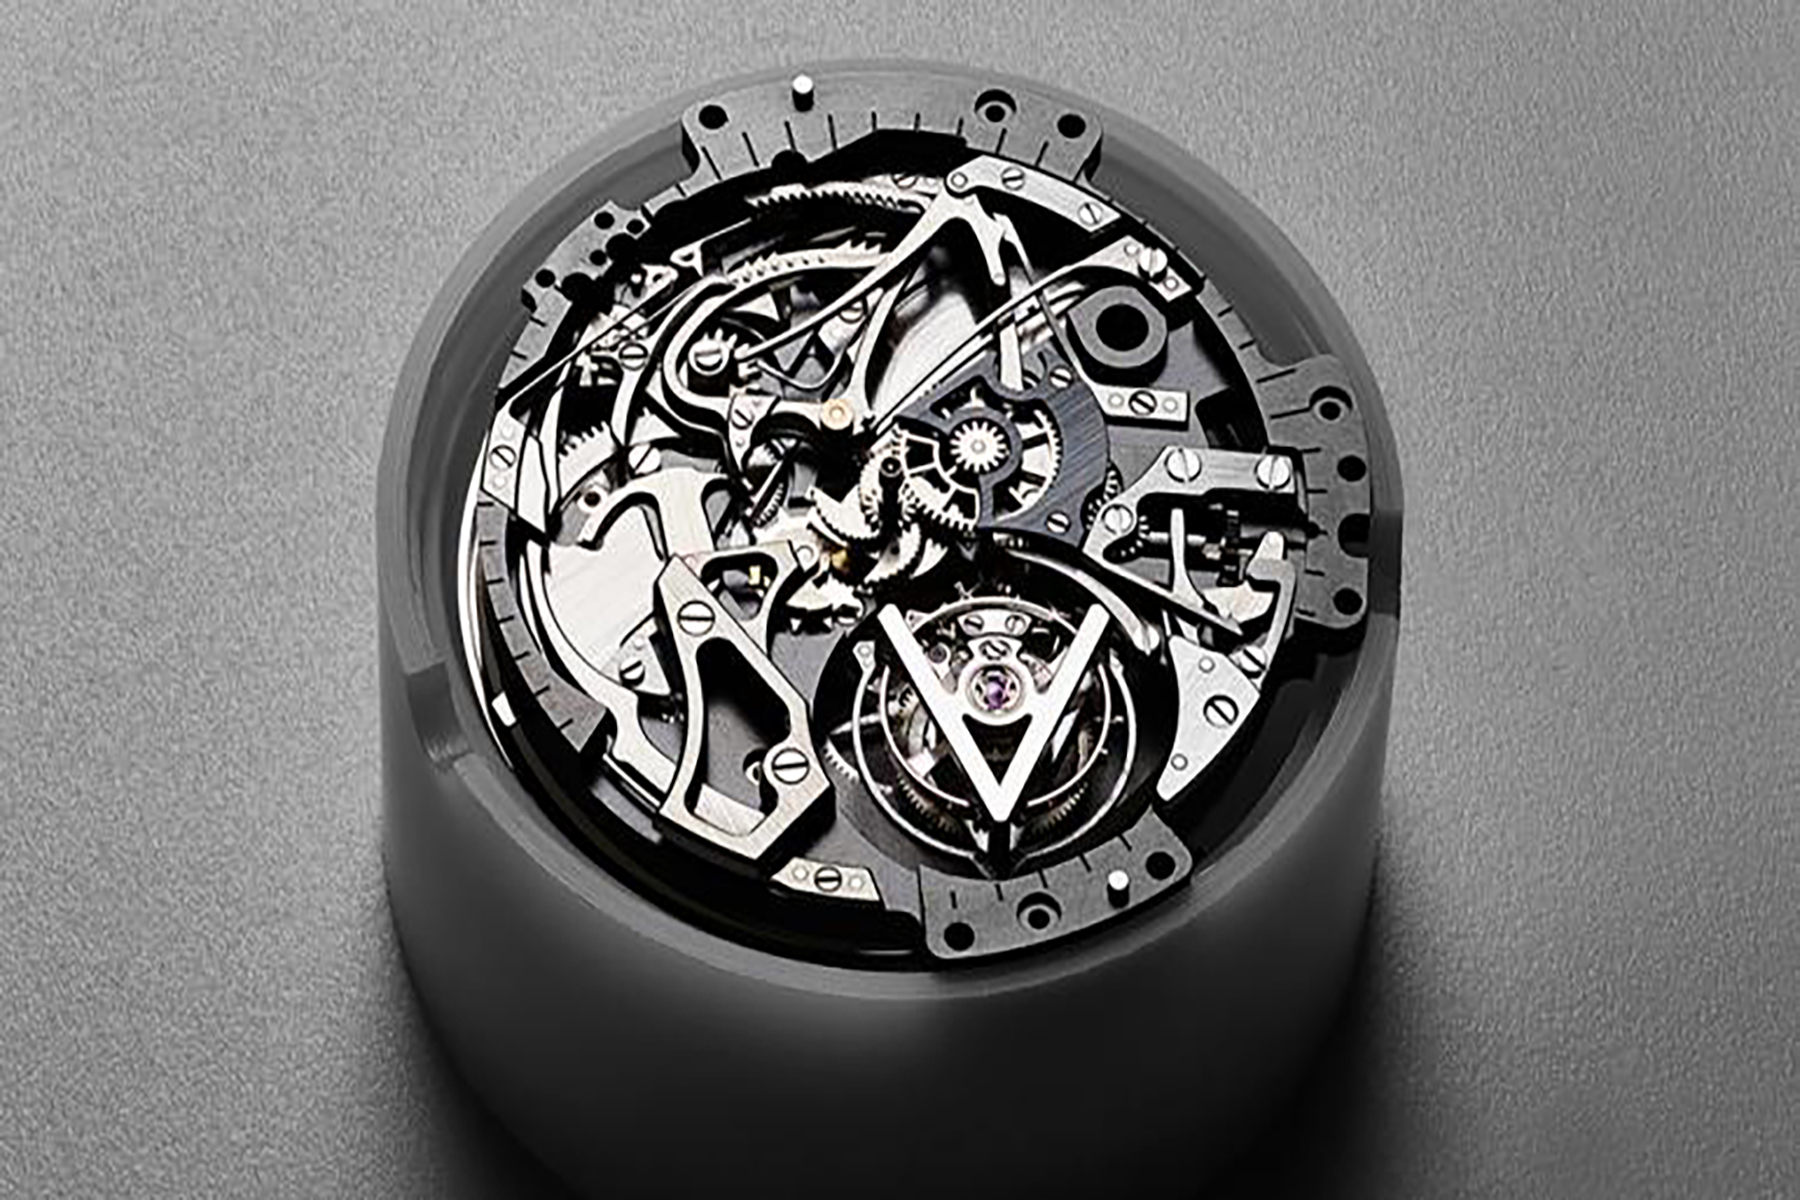 Could Louis Vuitton's Voyager be its most complicated timepiece?